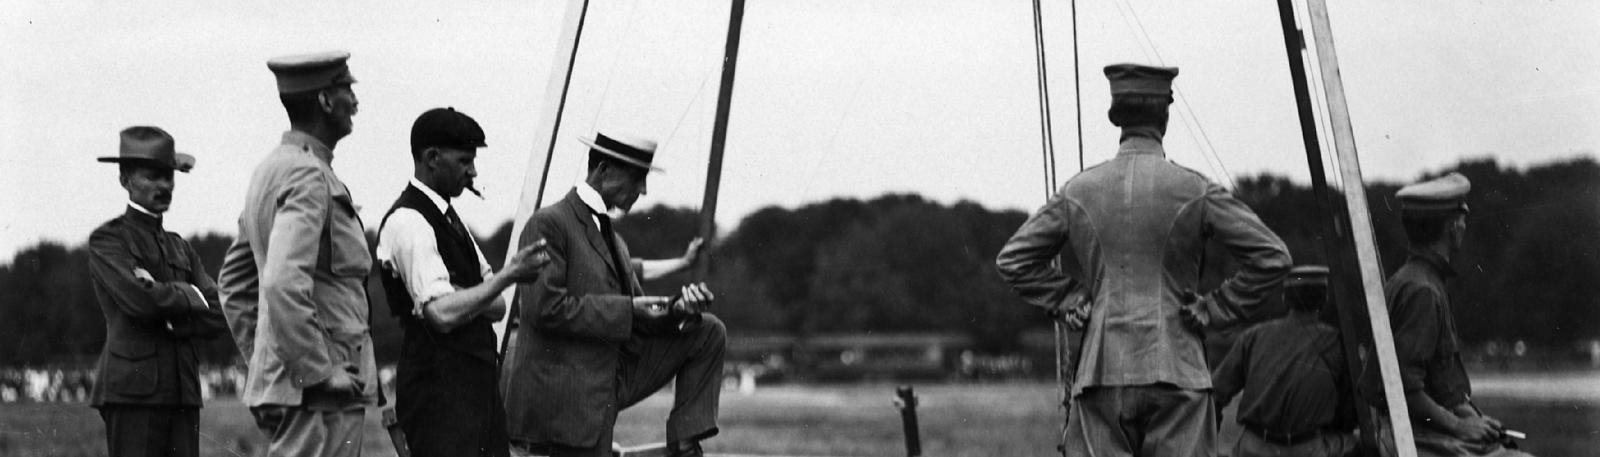 historical photo of the wright brothers